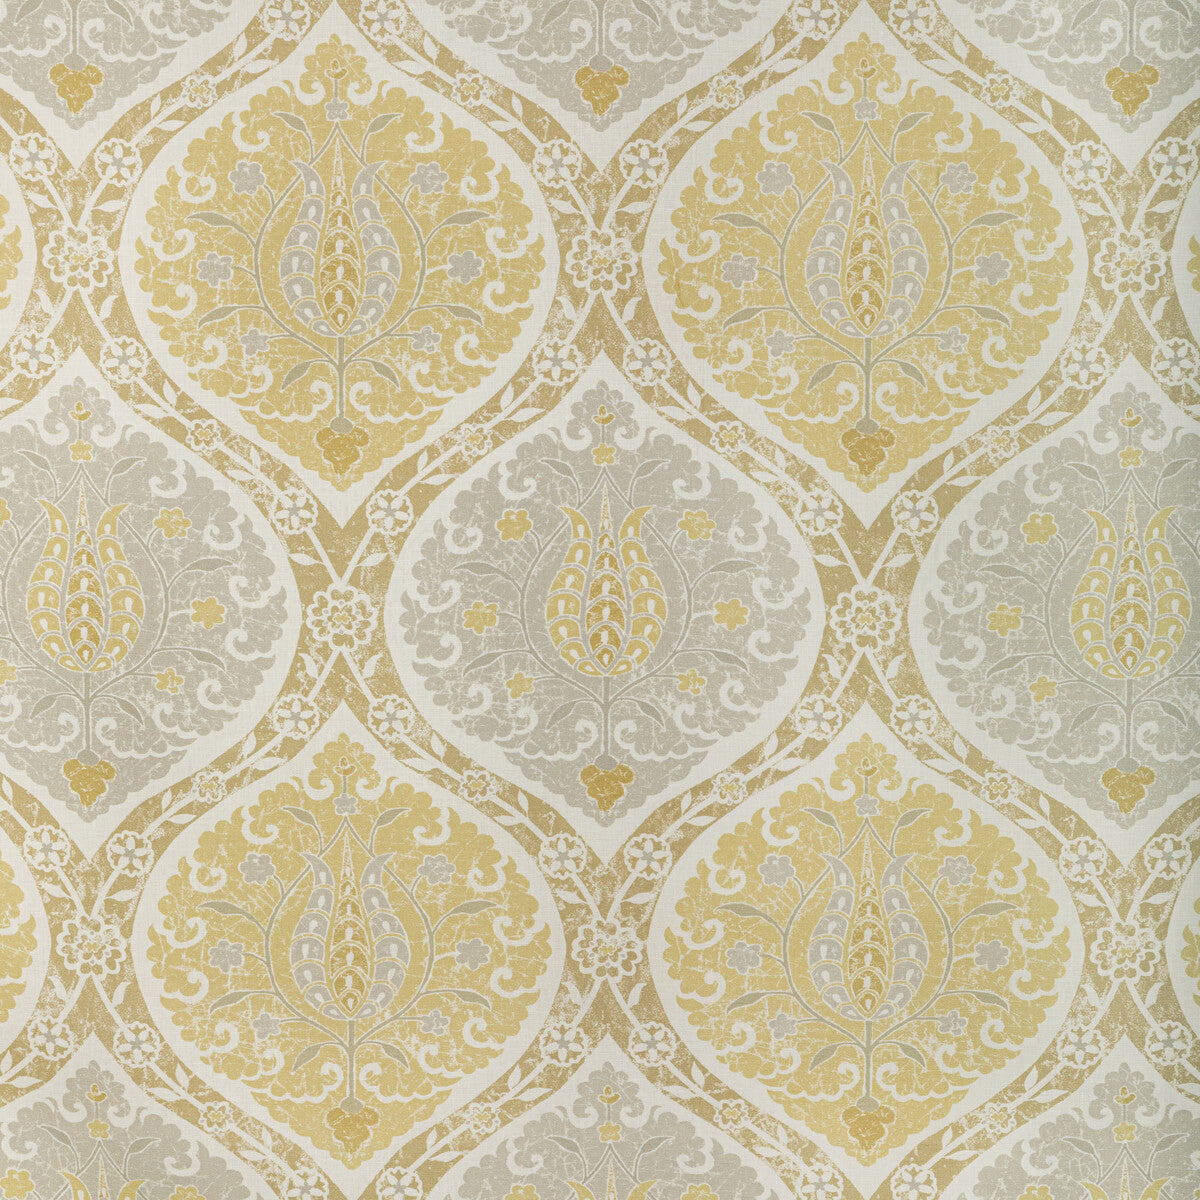 San Polo fabric in maize color - pattern SAN POLO.4.0 - by Kravet Basics